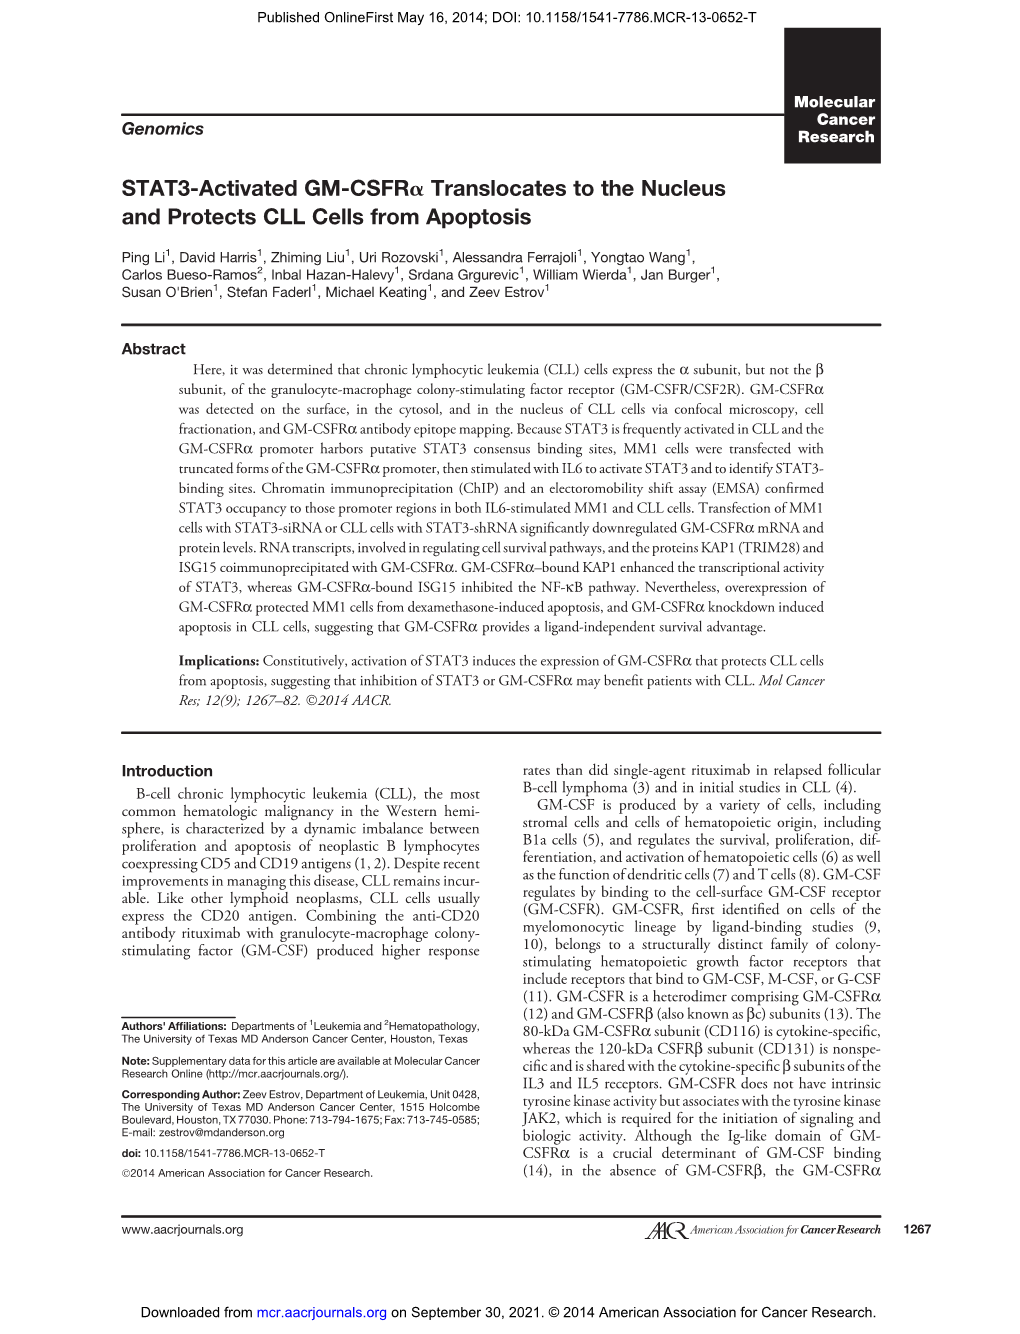 STAT3-Activated GM-Csfra Translocates to the Nucleus and Protects CLL Cells from Apoptosis